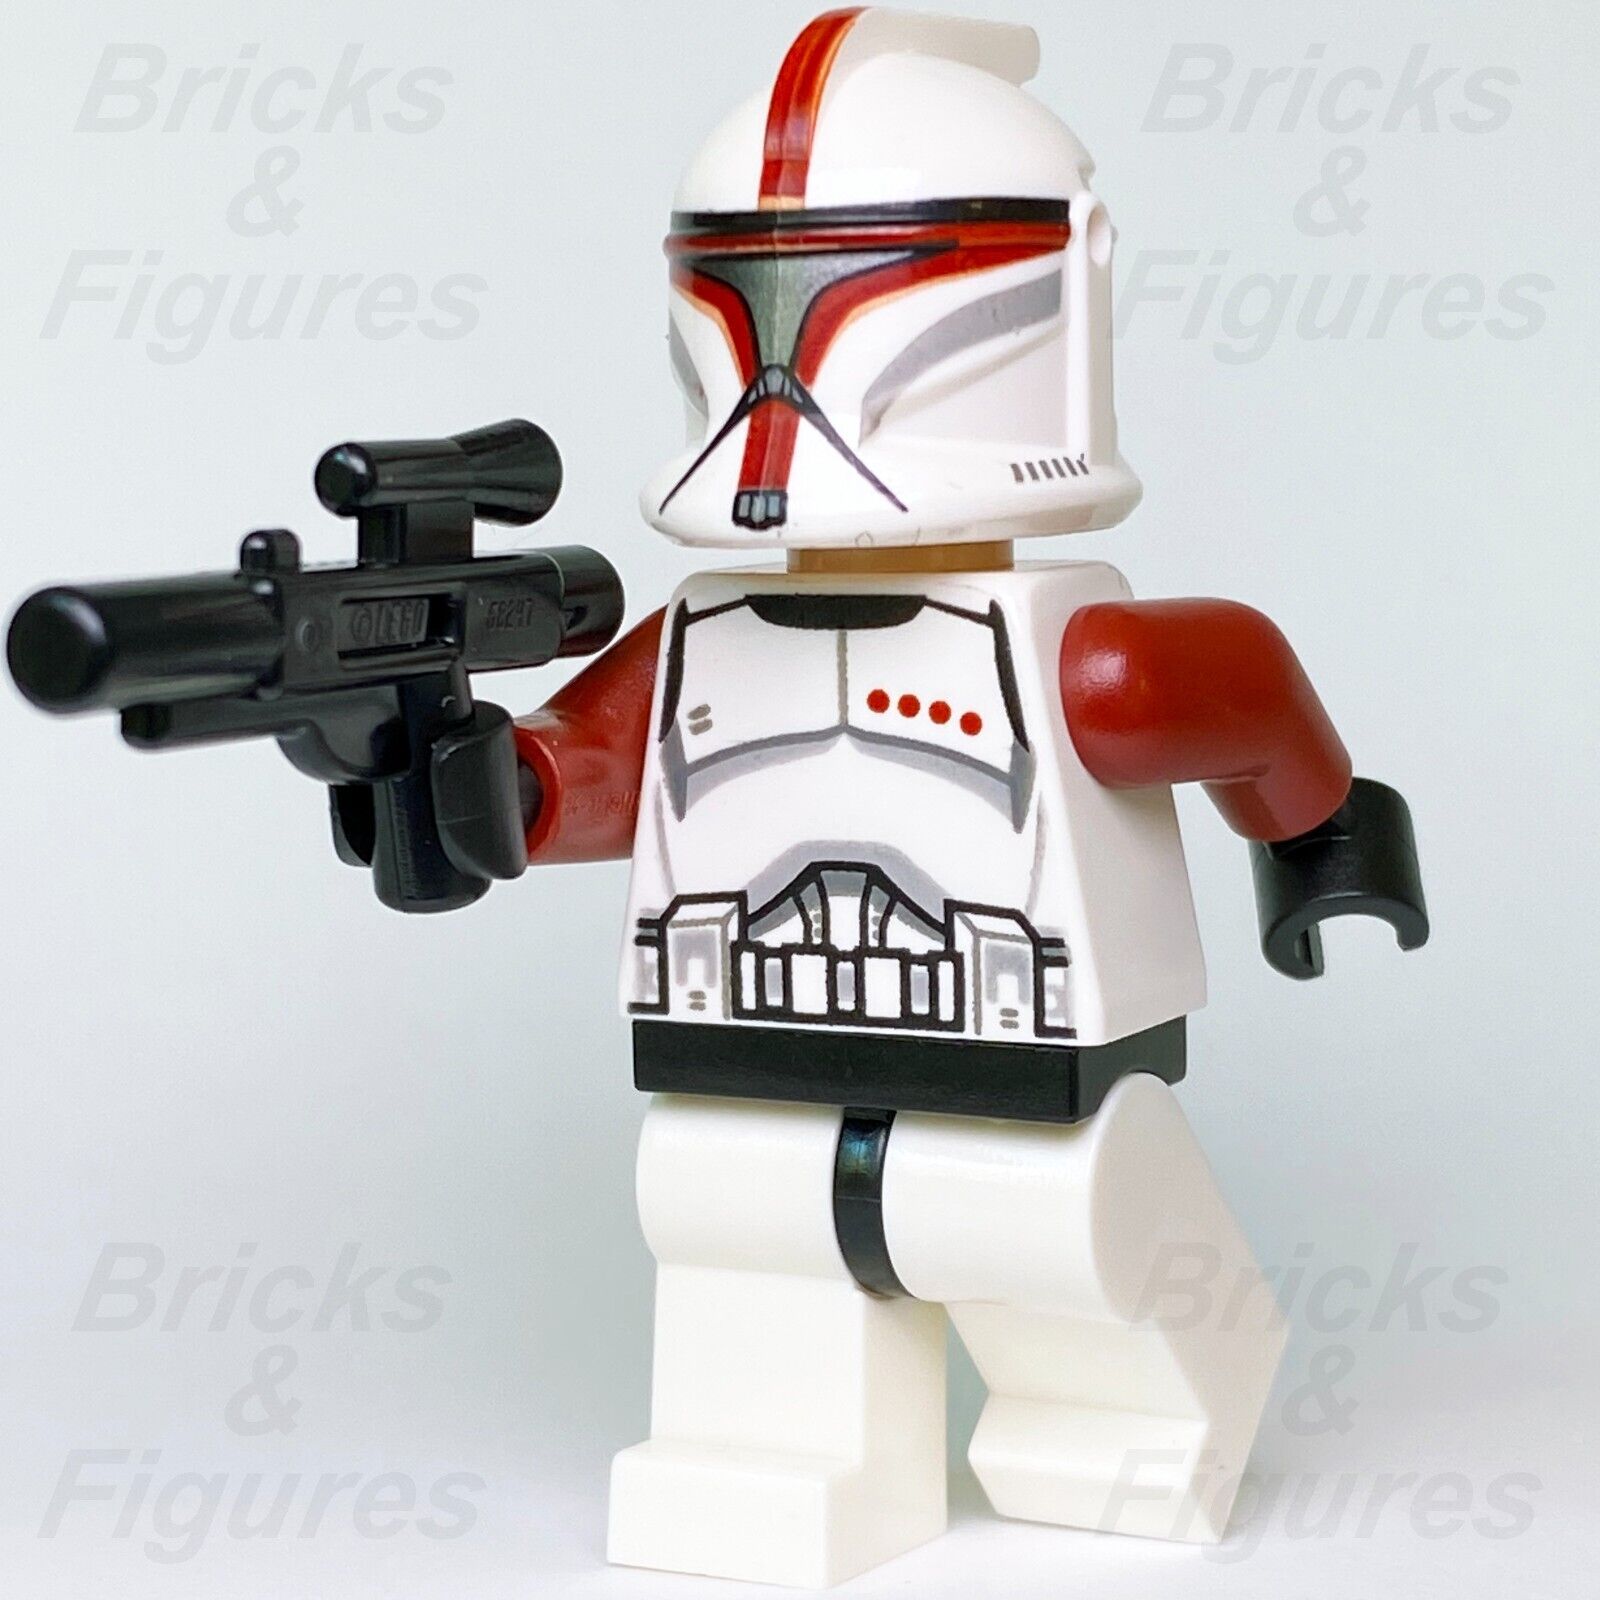 LEGO Star Wars Clone Trooper Captain Minifigure Phase 1 Red 75021 sw0492 New - Bricks & Figures